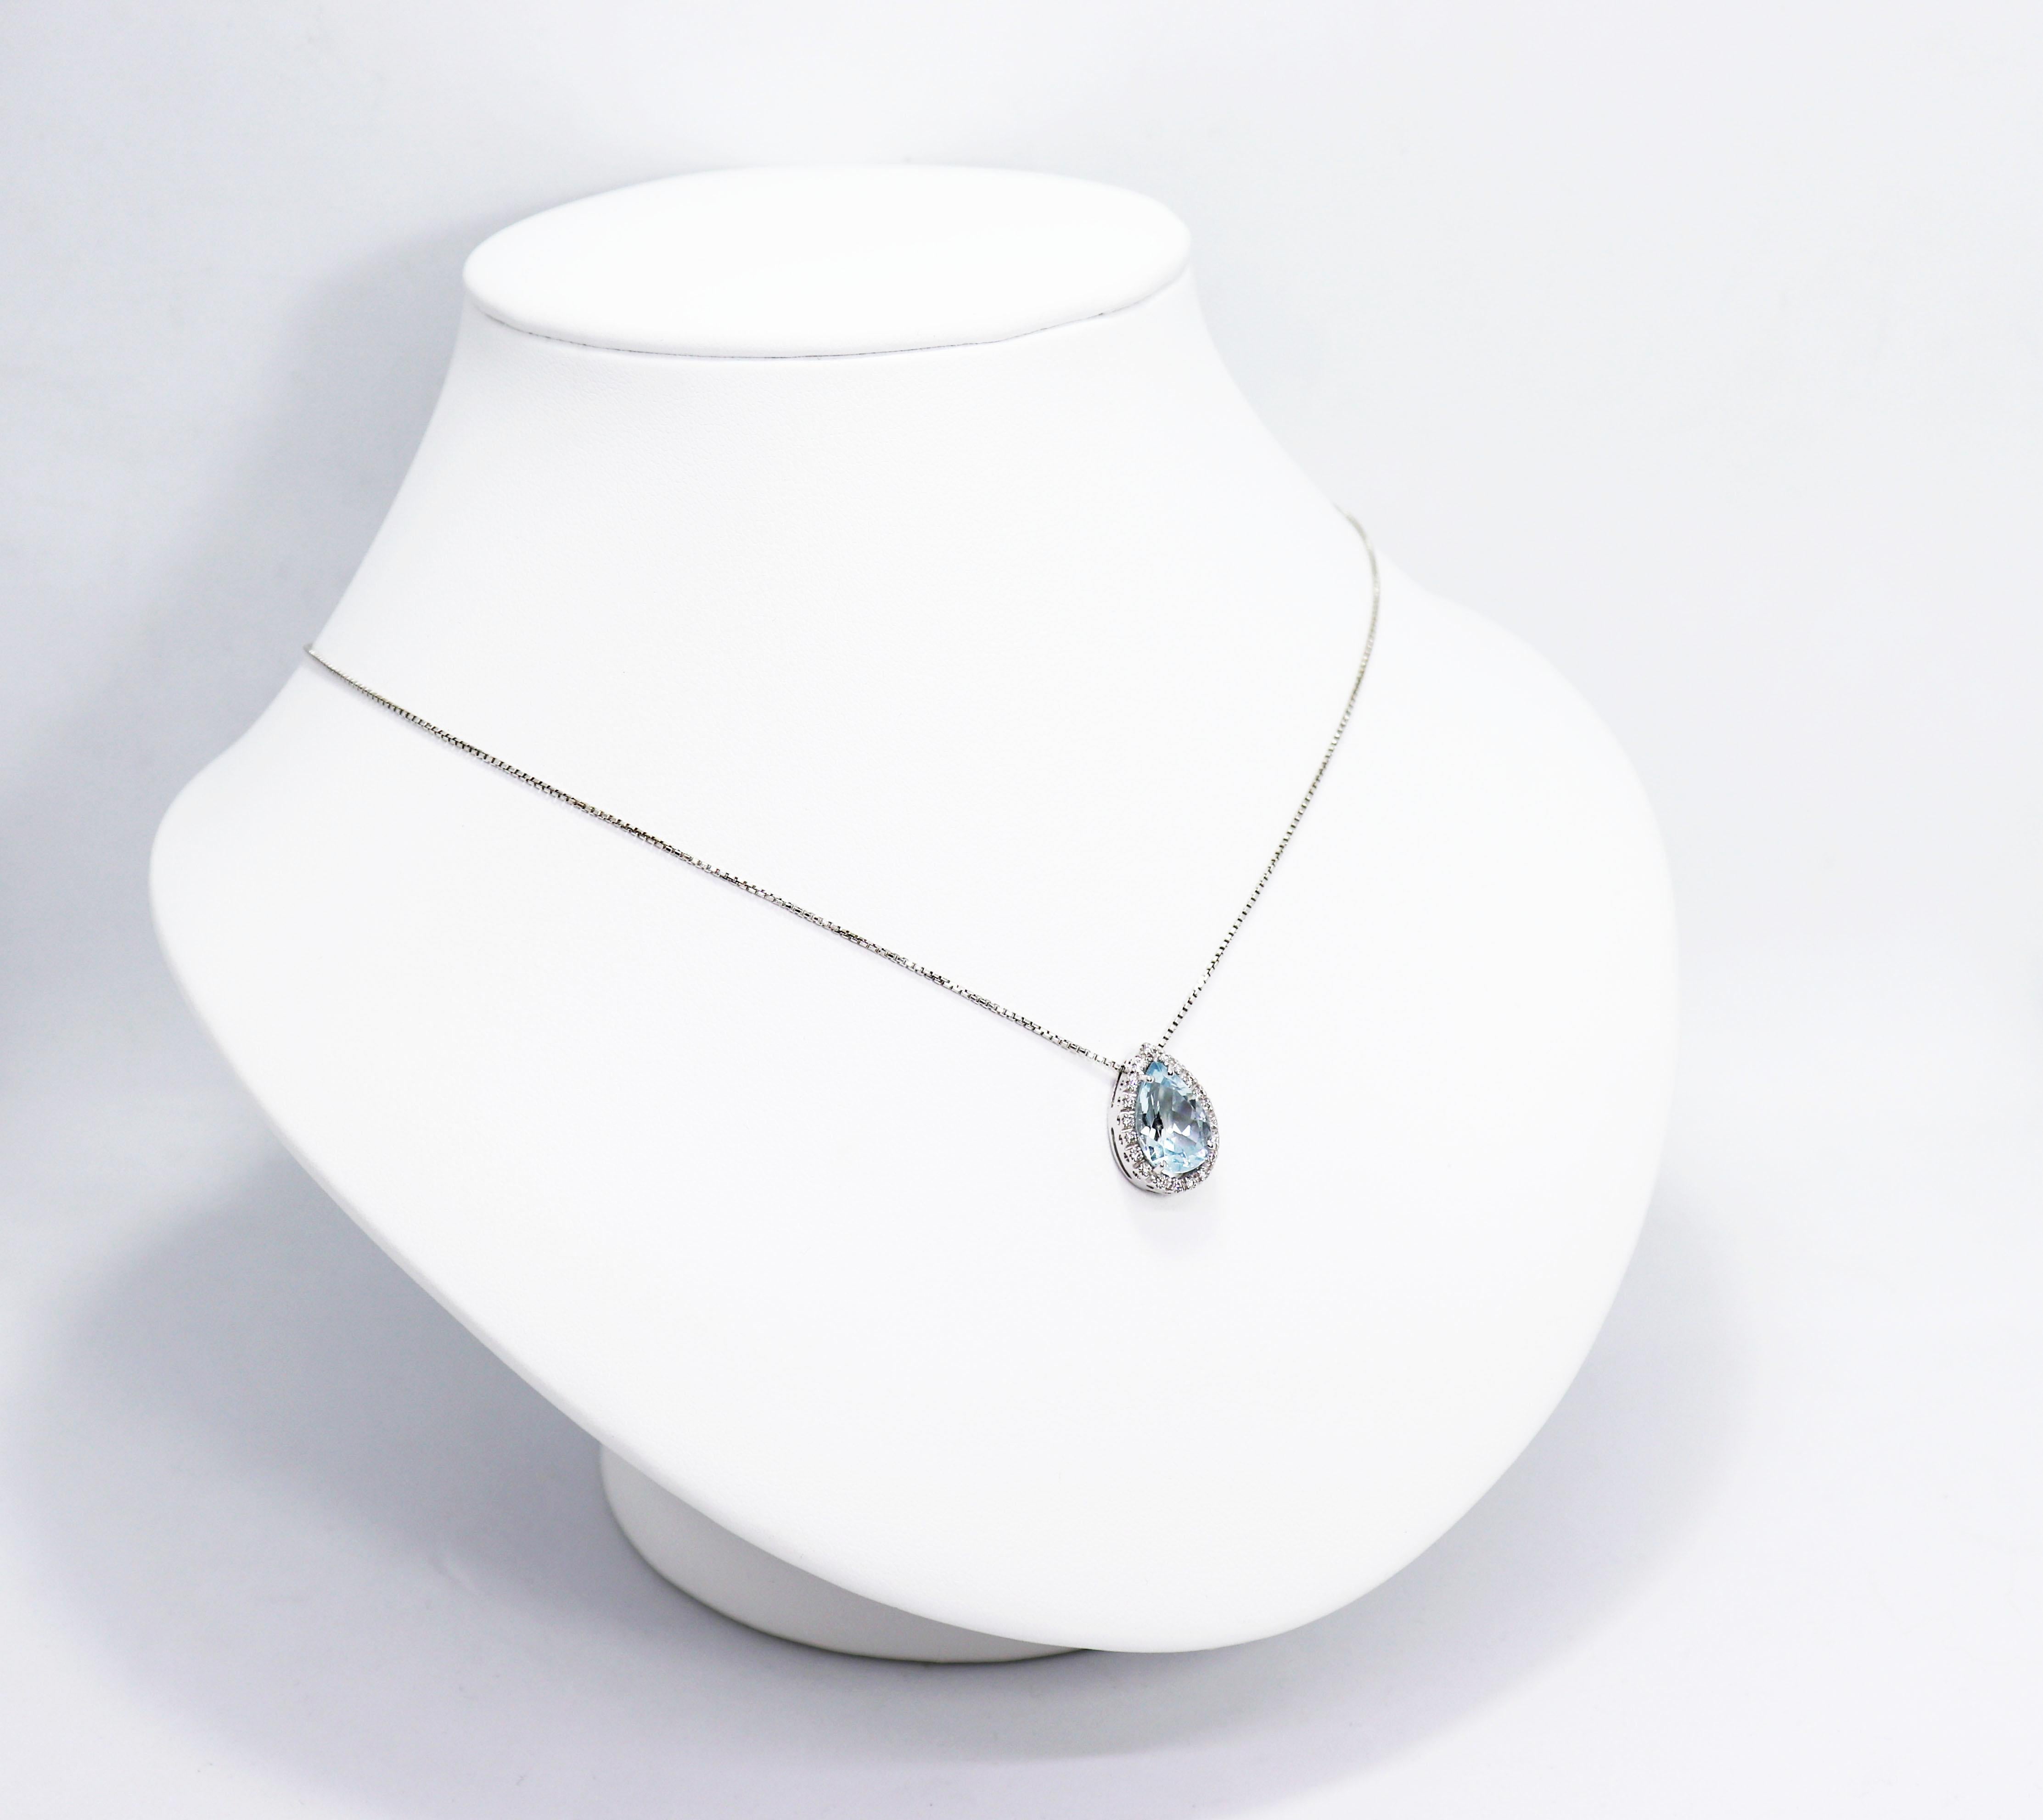 Italian pendant featuring a beautiful pear shape aquamarine weighing approximately 2.50ct in a four claw setting, surrounded by 20 round brilliant cut diamonds weighing approximately 0.20ct total, all in 18 carat white gold, open back claw settings.